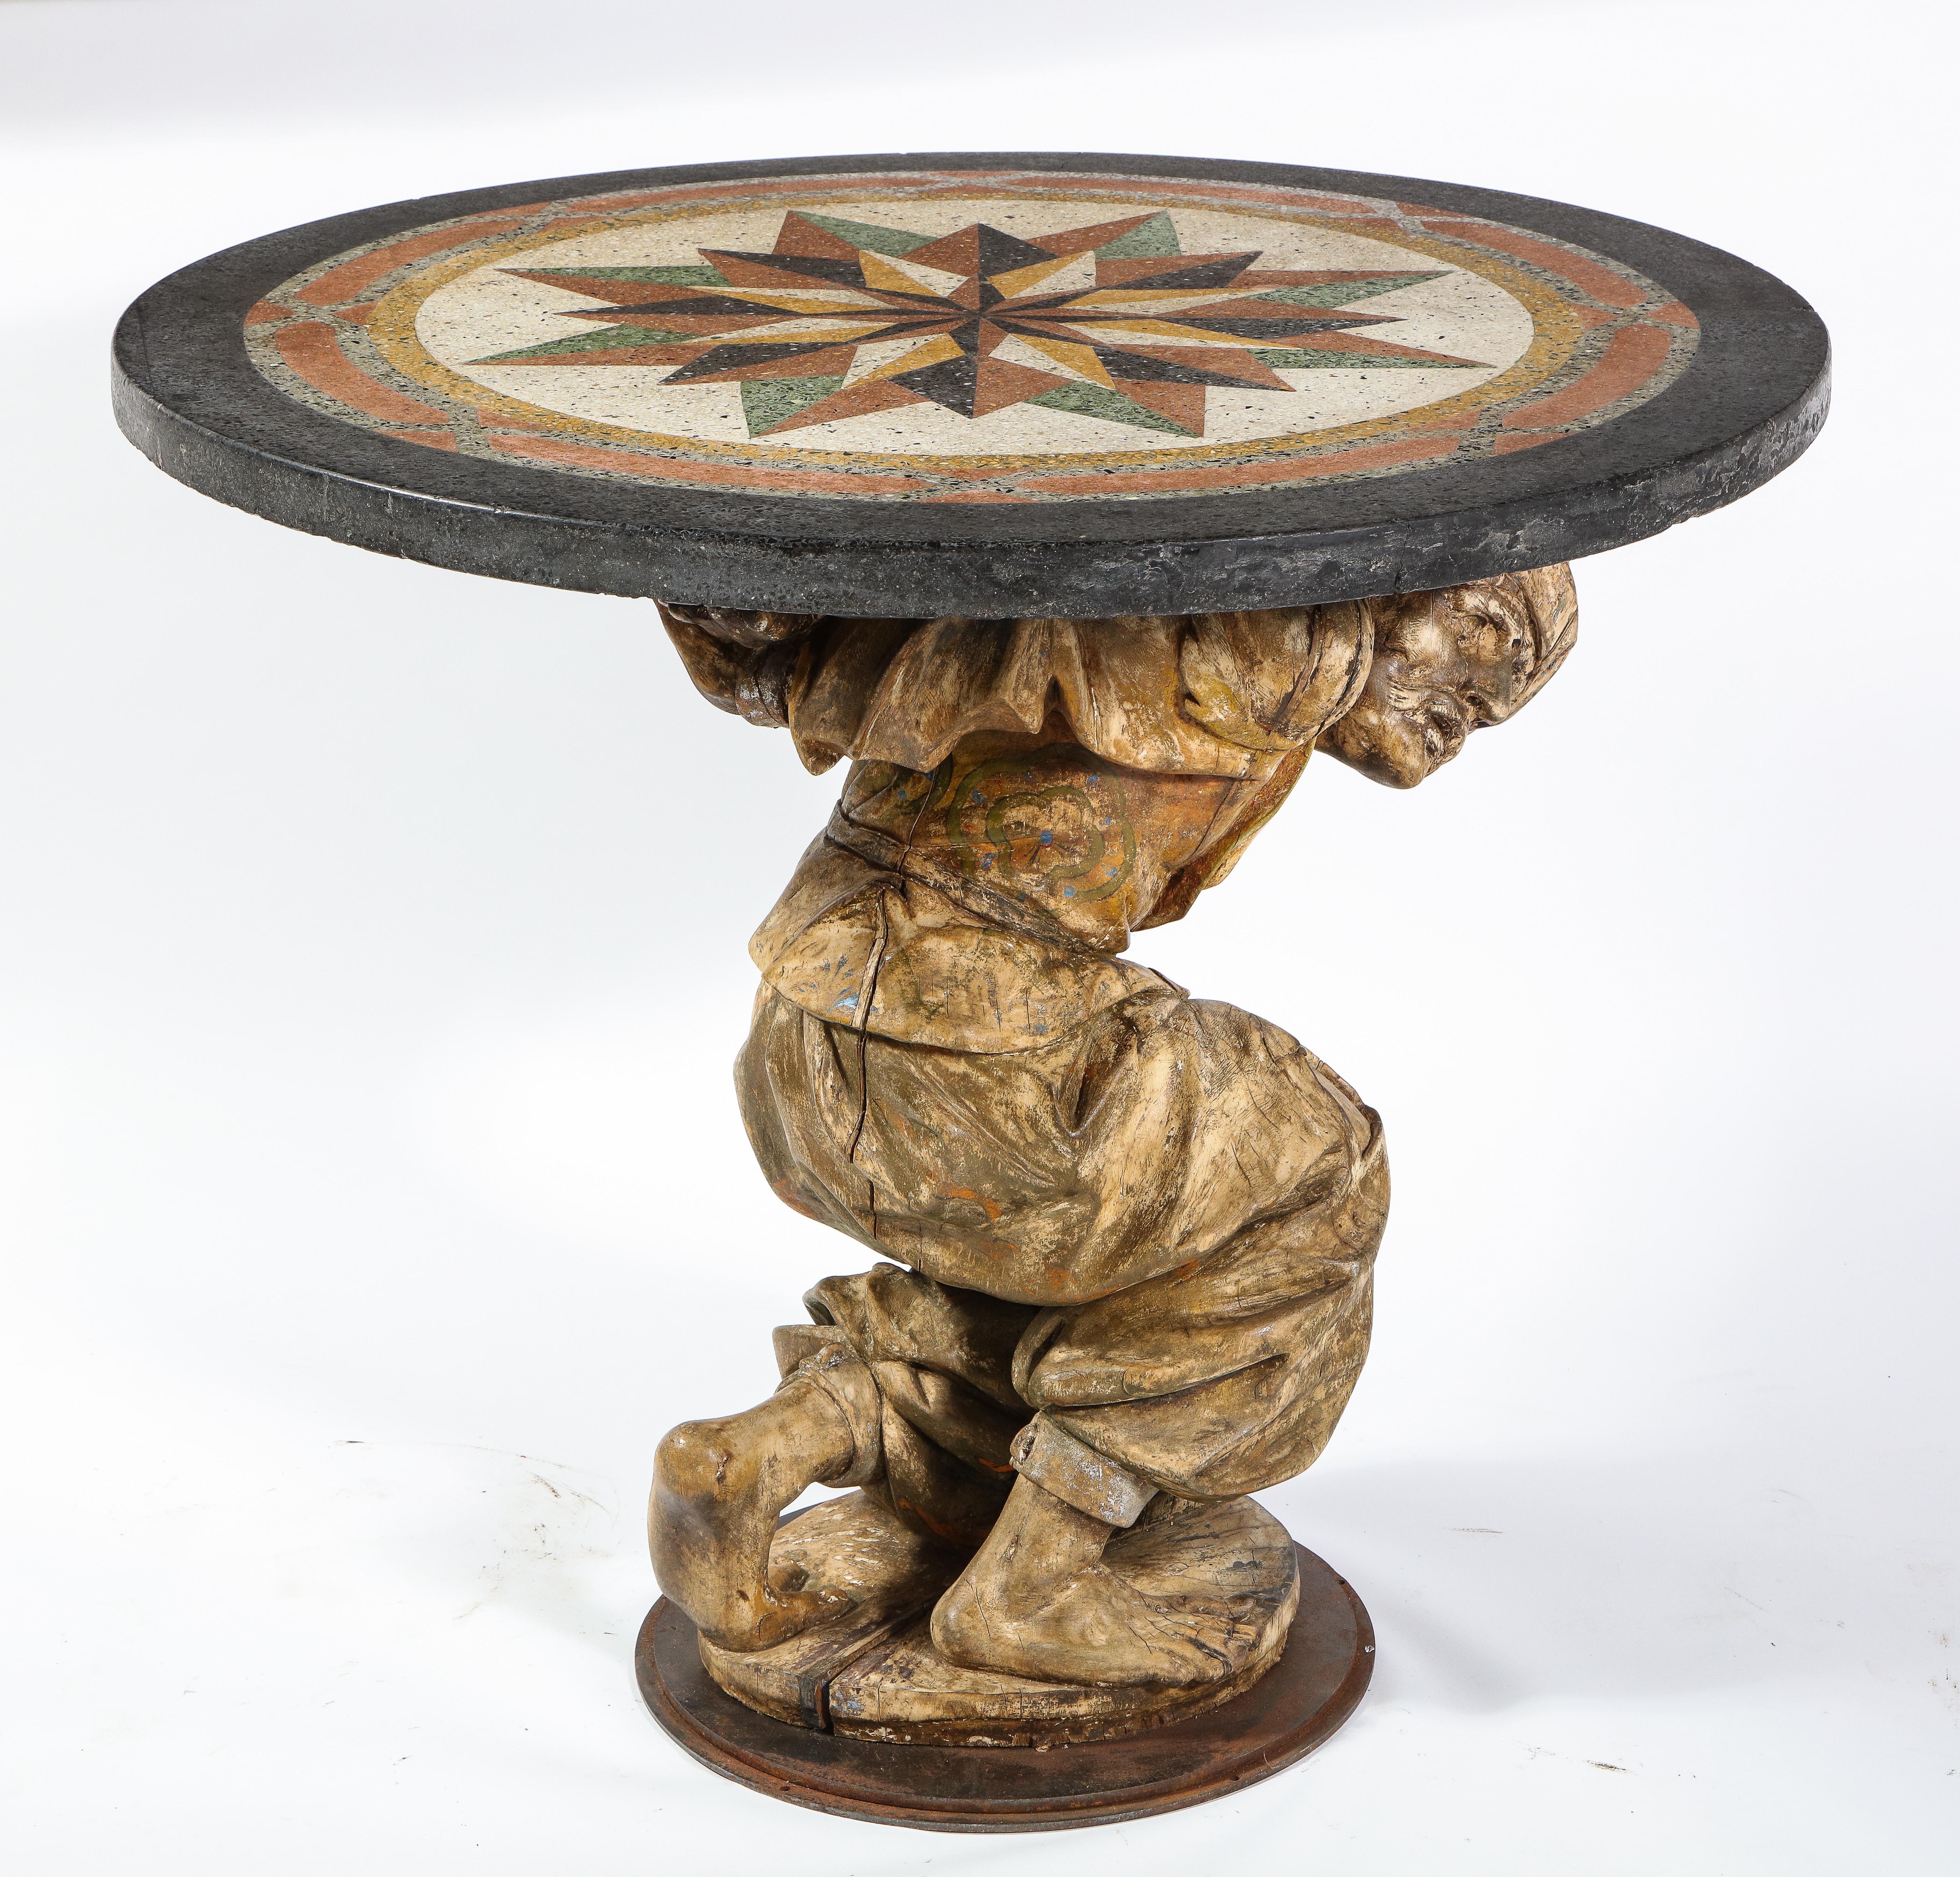 A fabulous center table/gueridon with a carved wooden roman figure of a man dressed in Italian 18th century attire with a gorgeous Pietra Dura marble top. Fabulously hand carved, this table is truly a masterpiece. The figure holding the top is made